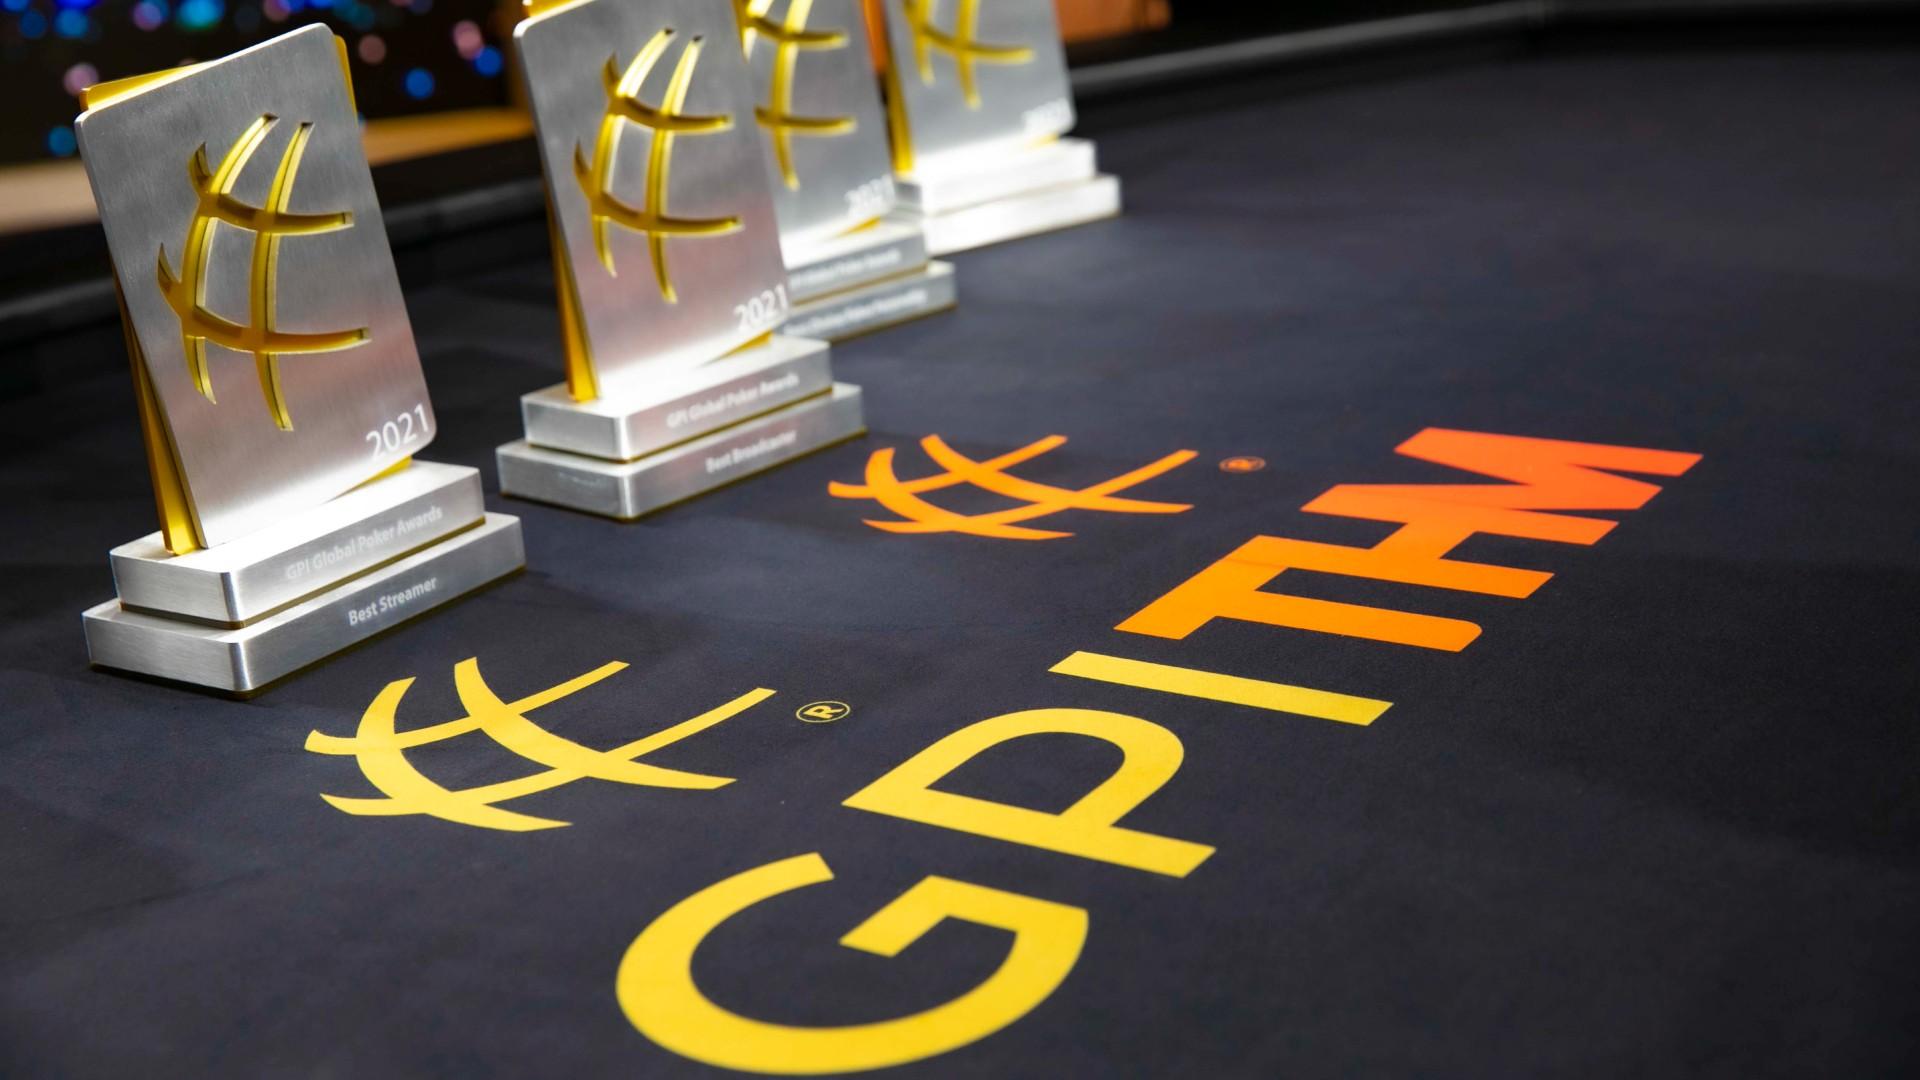 Global Poker Awards trophies sit on a poker table